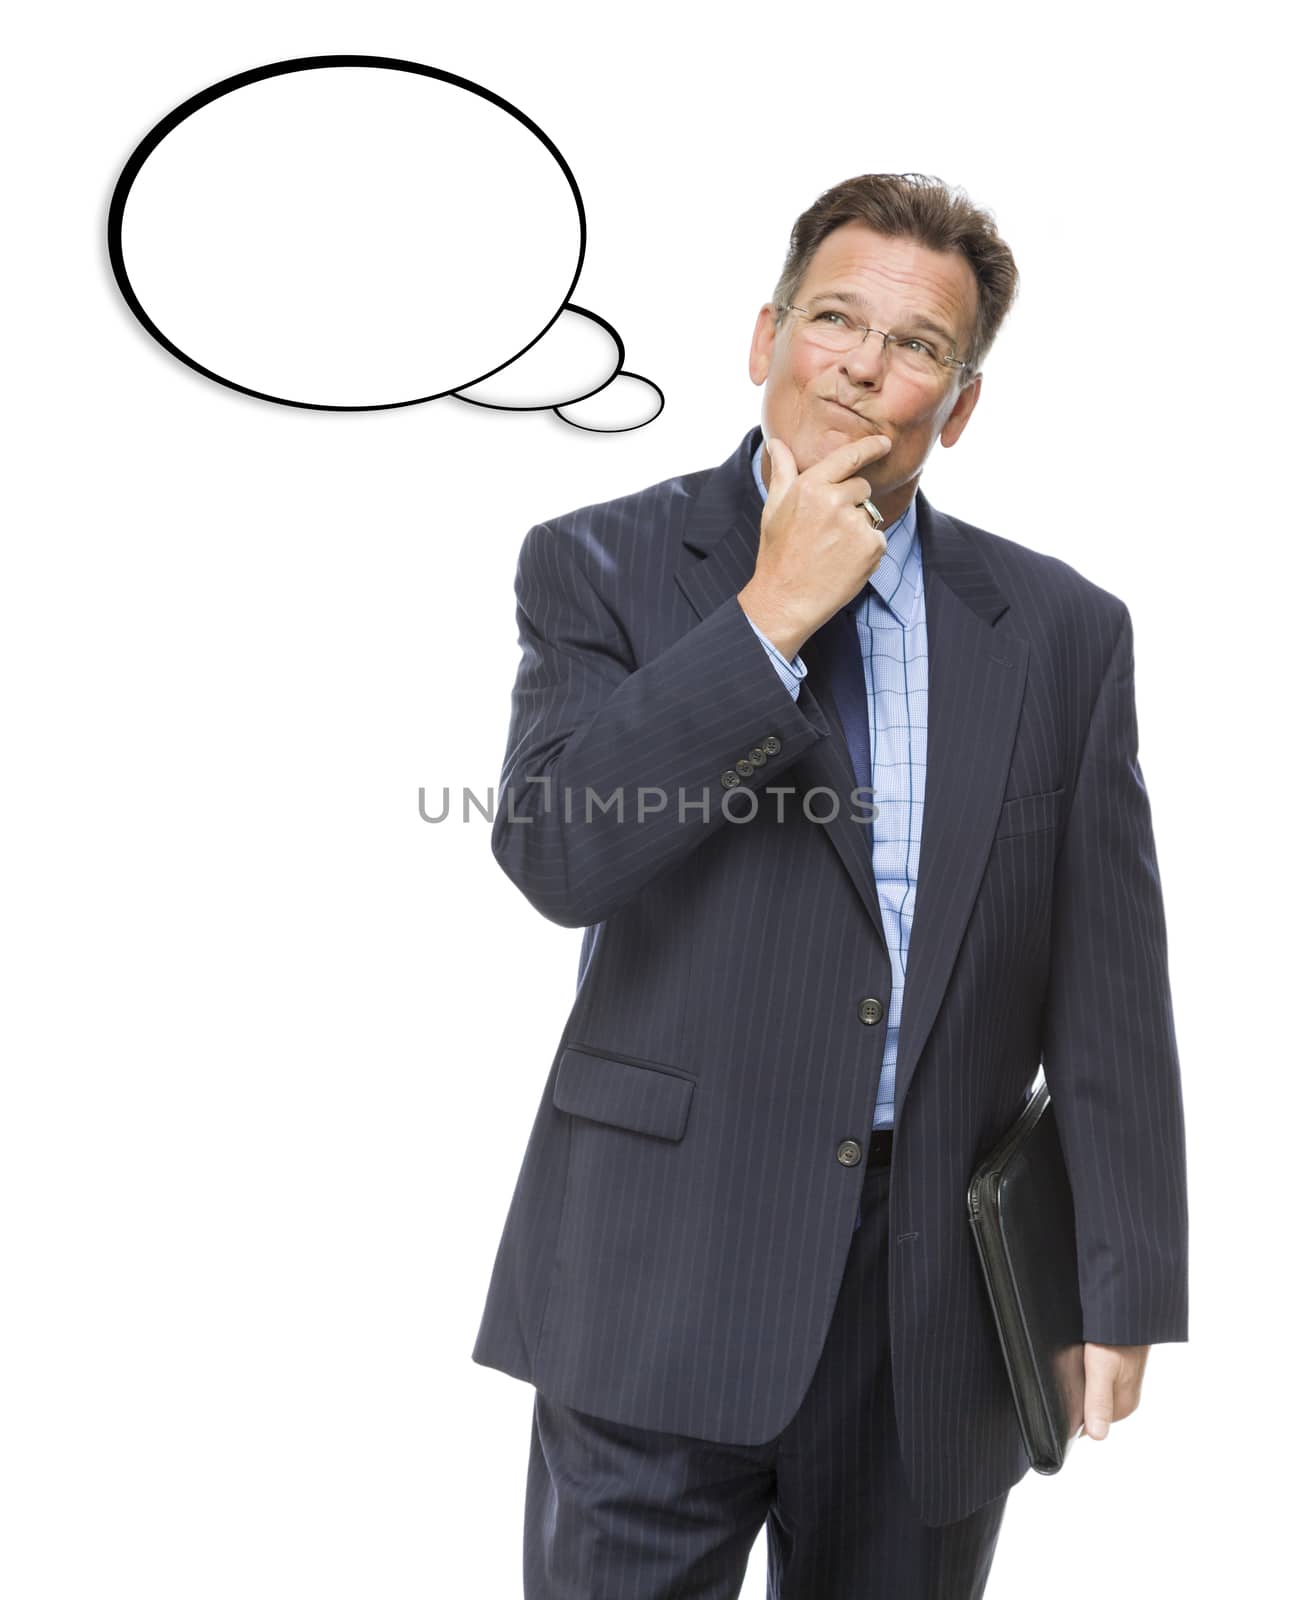 Handsome Pensive Businessman With Hand on Chin Looking Up At Blank Thought Bubble On White.